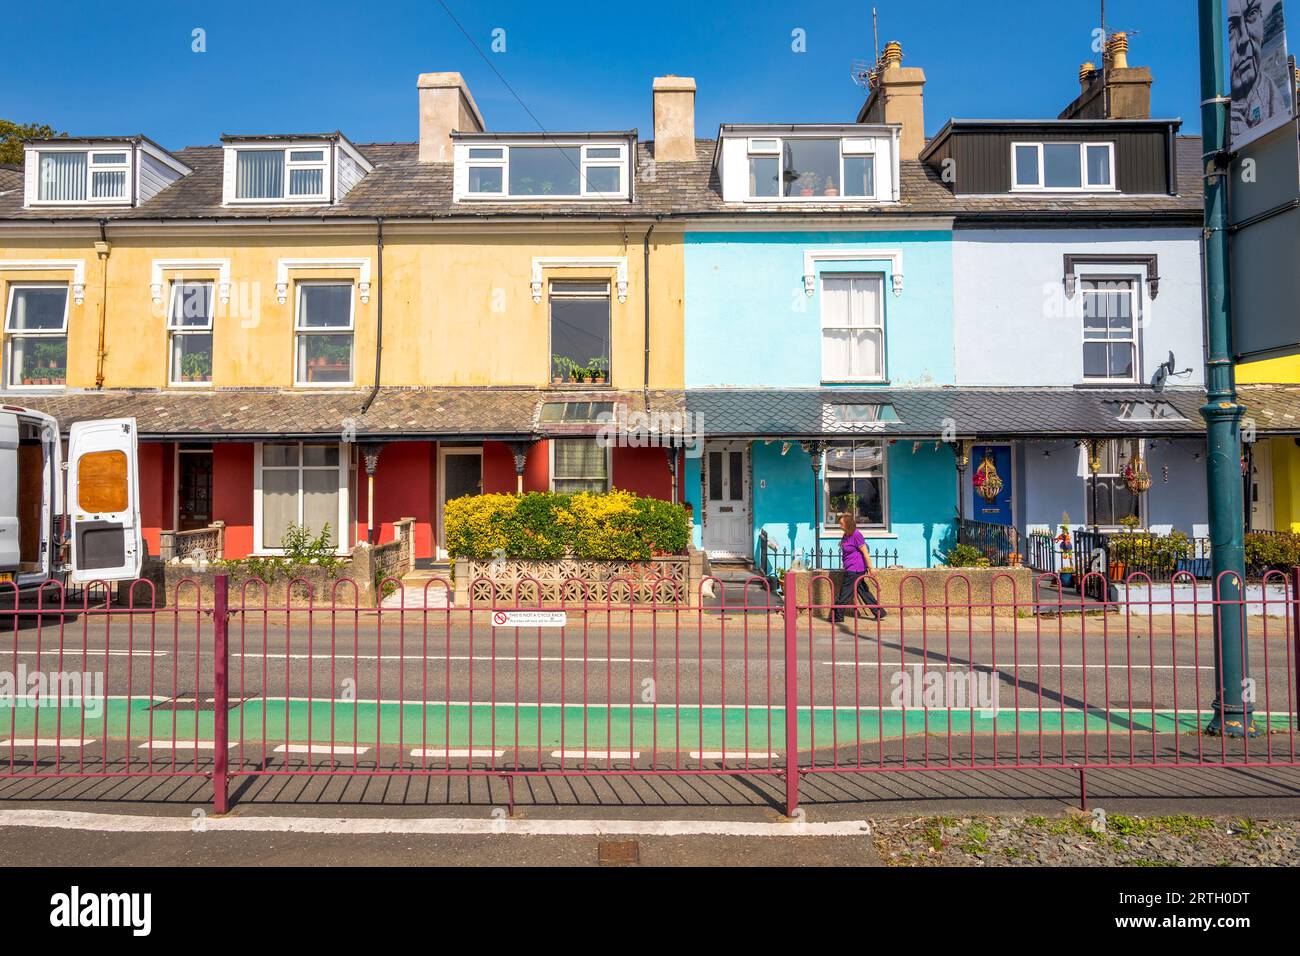 Row of pastel coloured terraced housing on the high street at Portmadoc, Gwynedd, Wales. Stock Photo